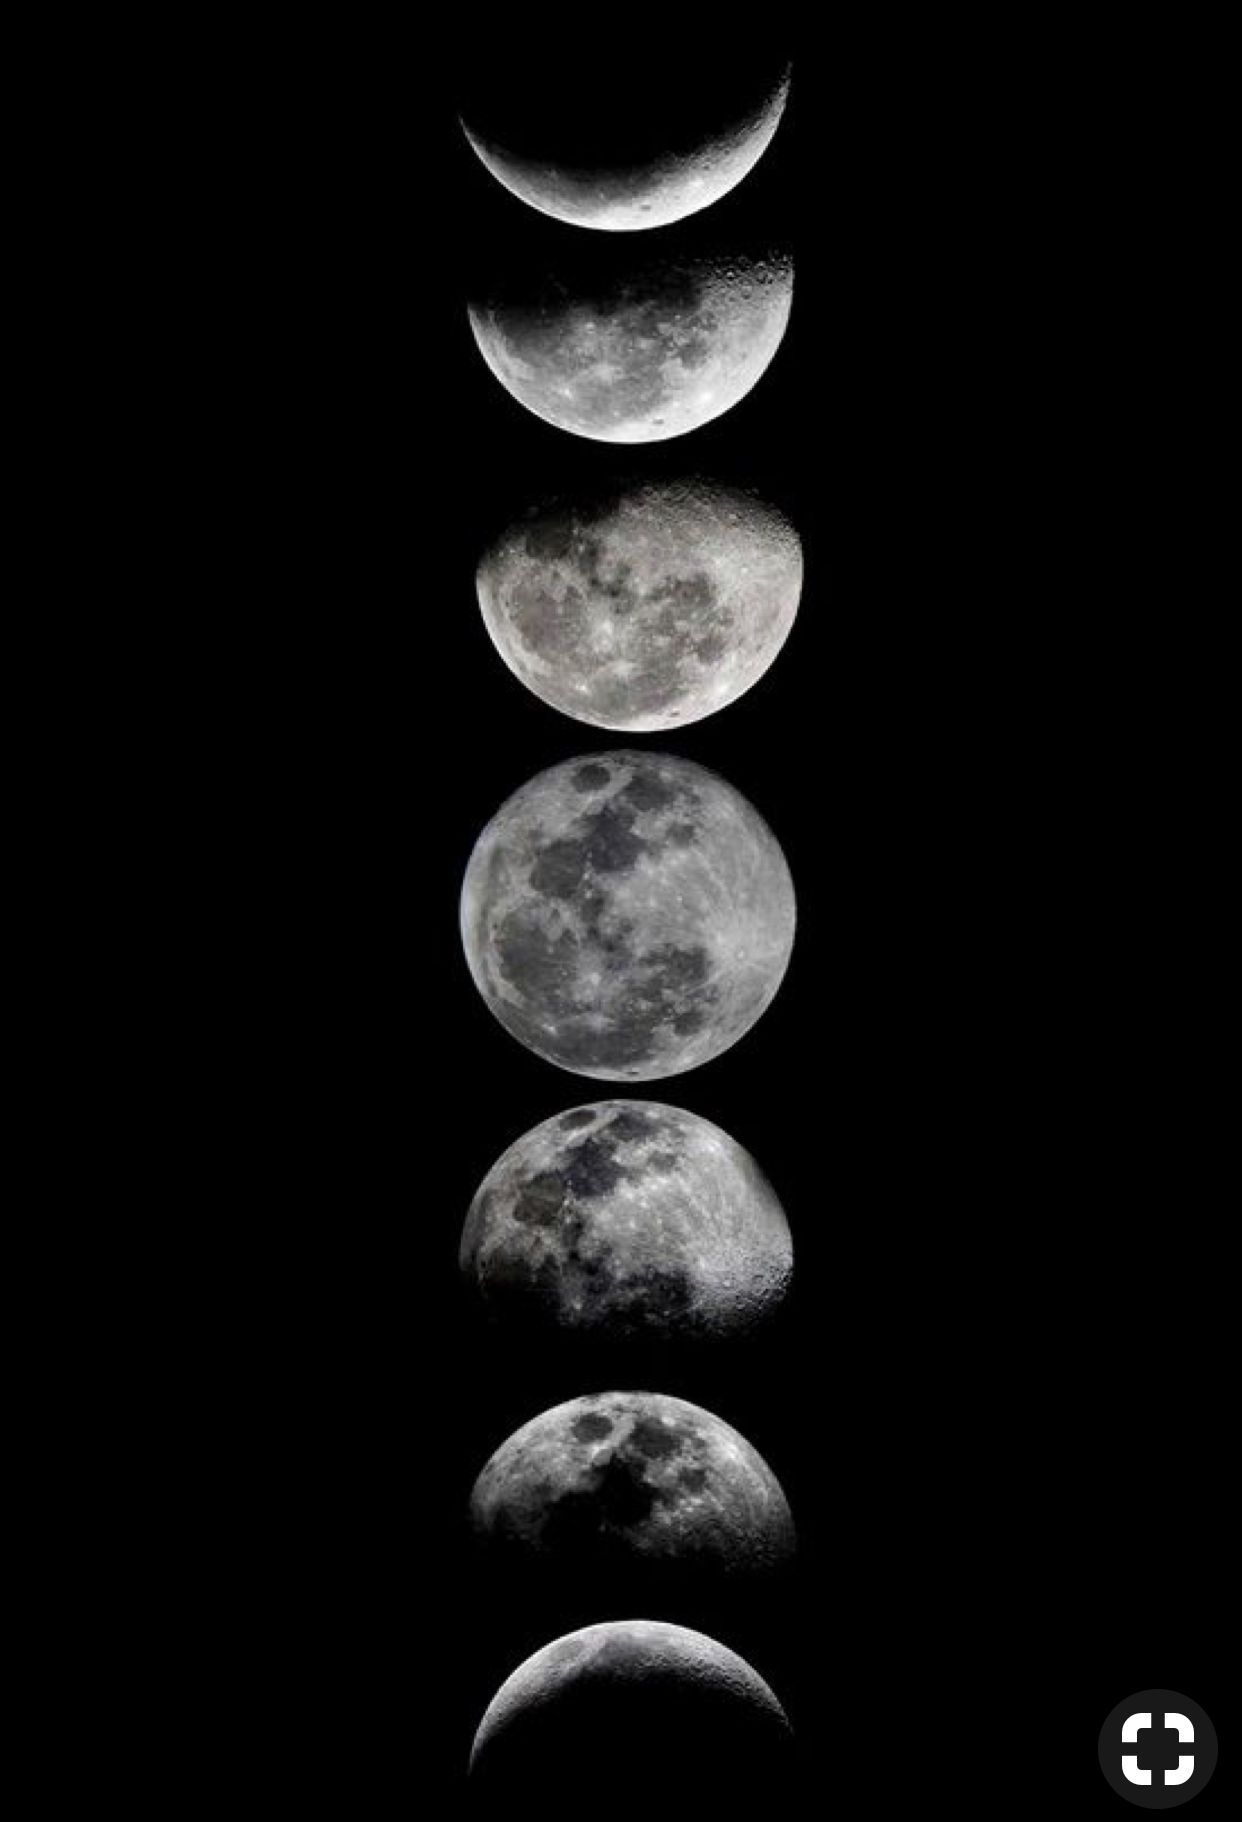 A sequence of photos of the moon in different phases - Moon phases